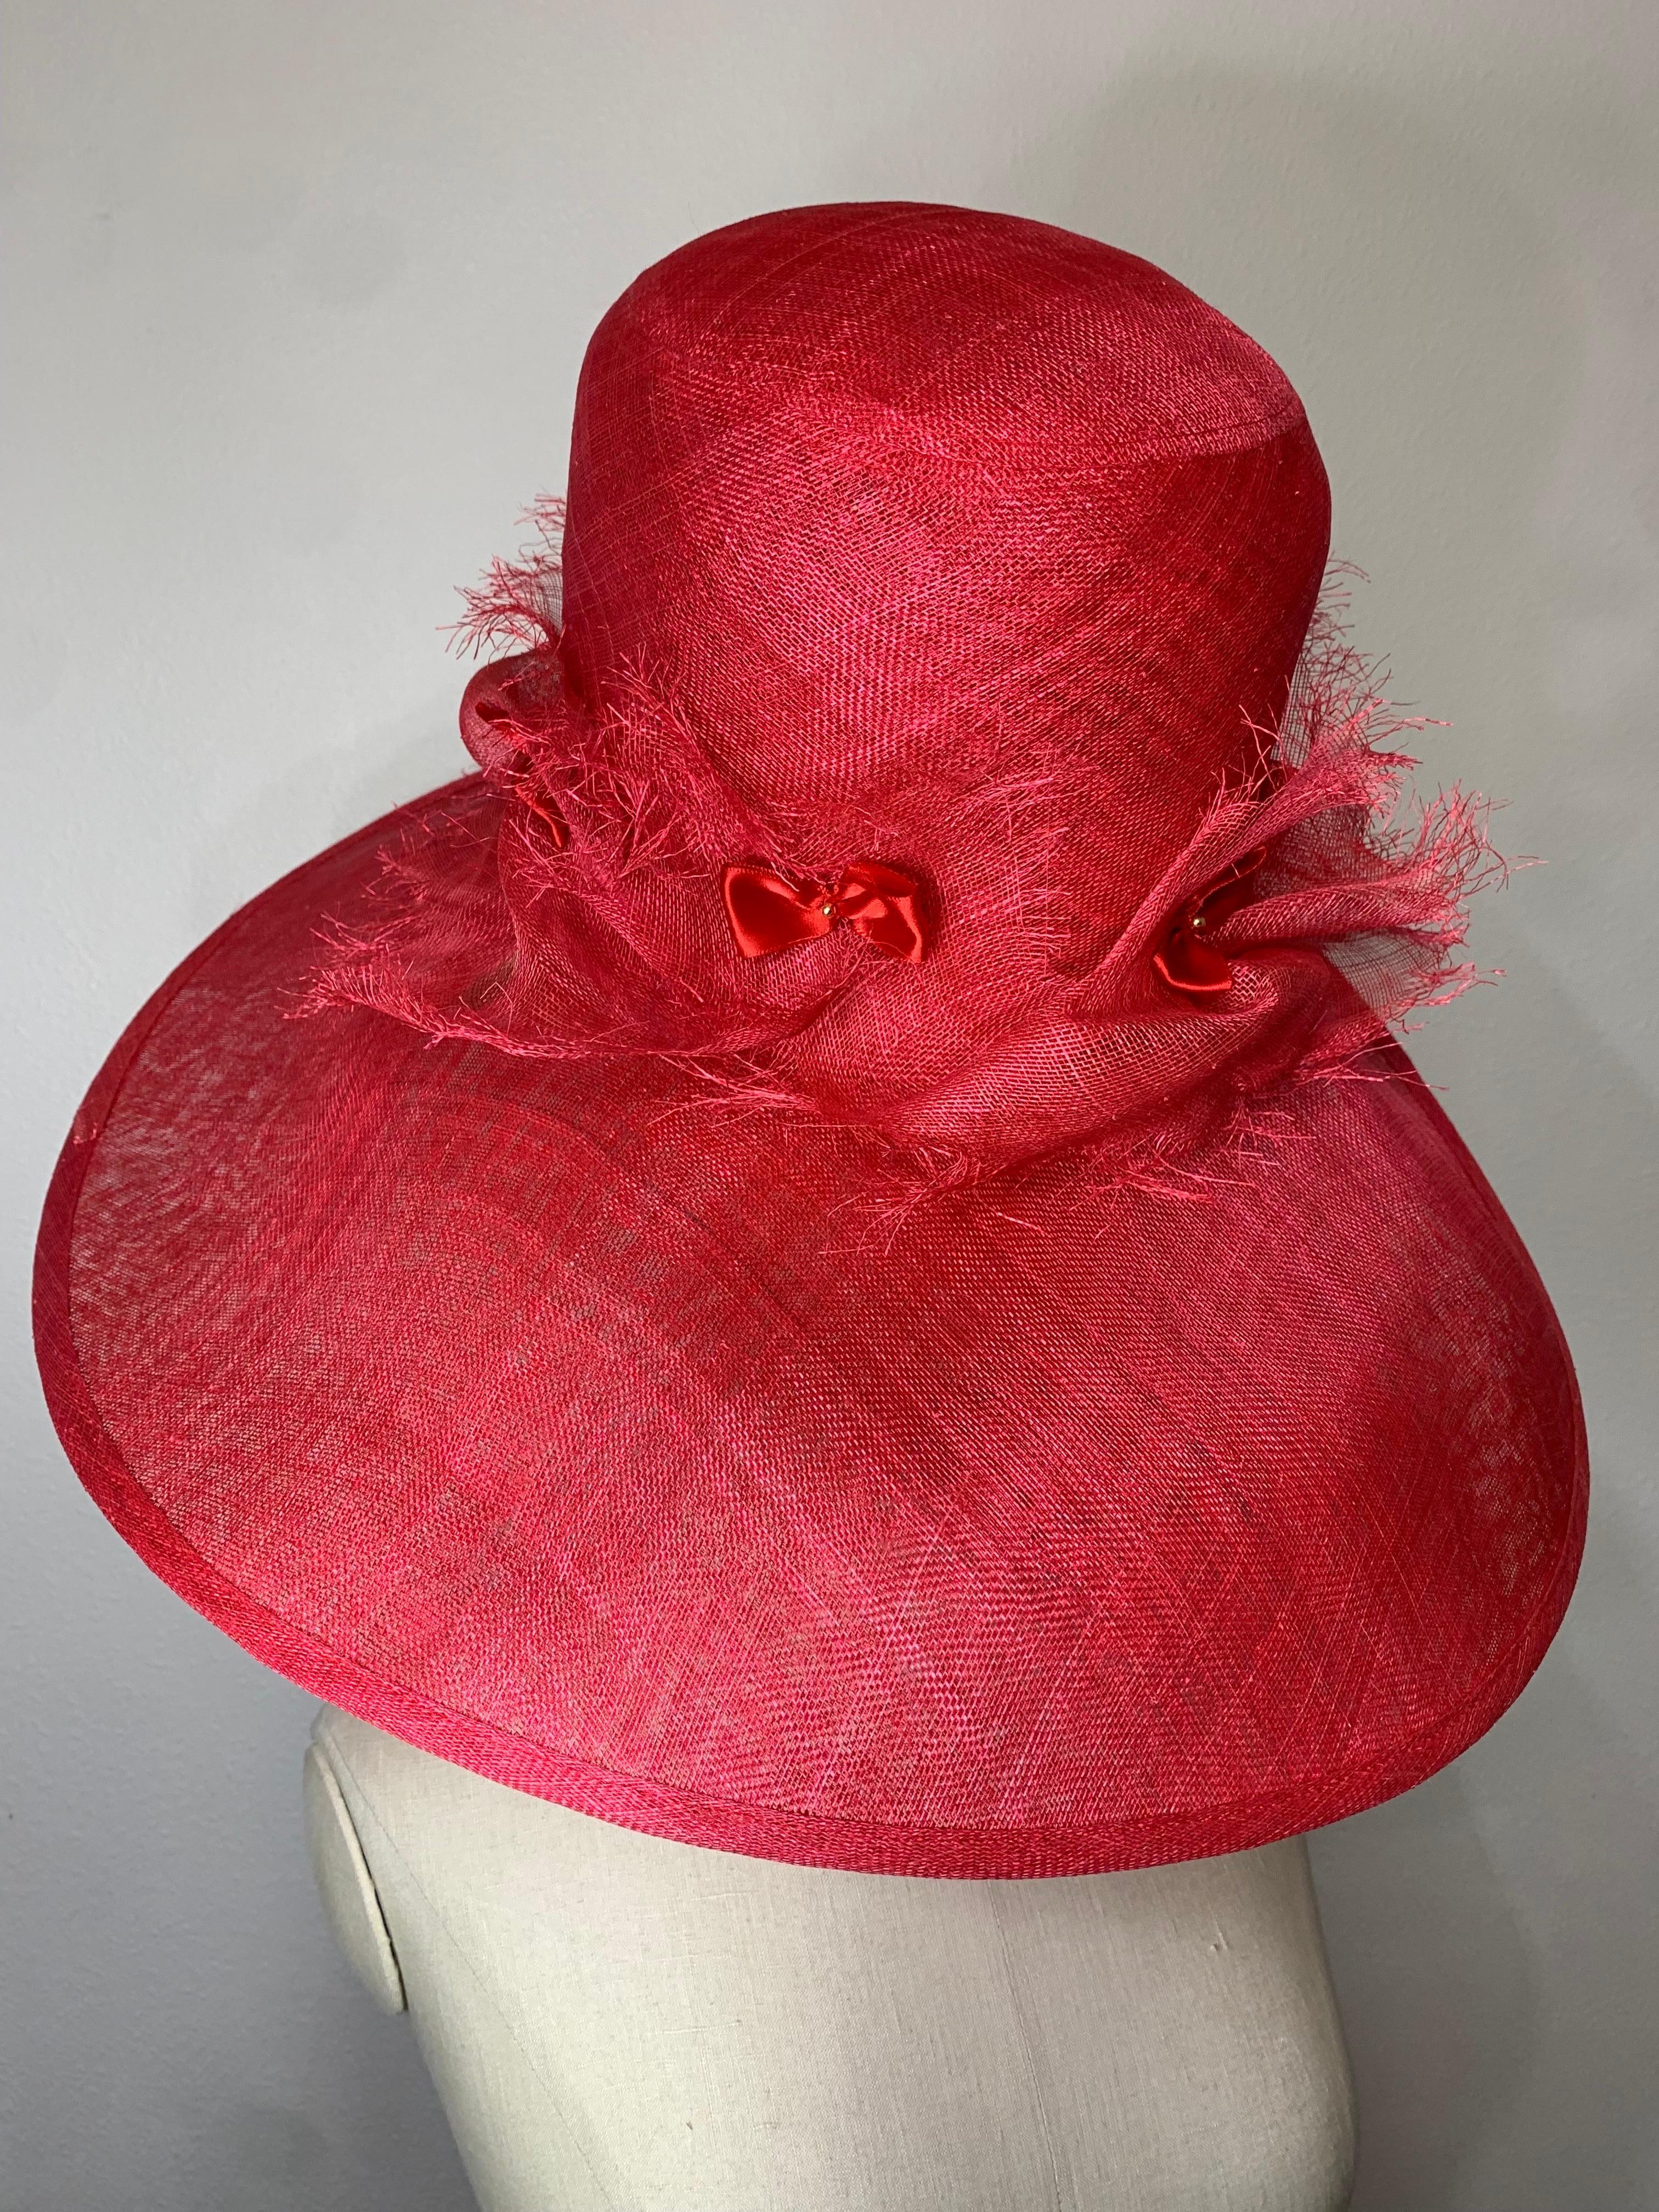 Maison Michel Cardinal Red Sheer Straw Wide Brim Tall Crown Hat w Satin Bows For Sale 7